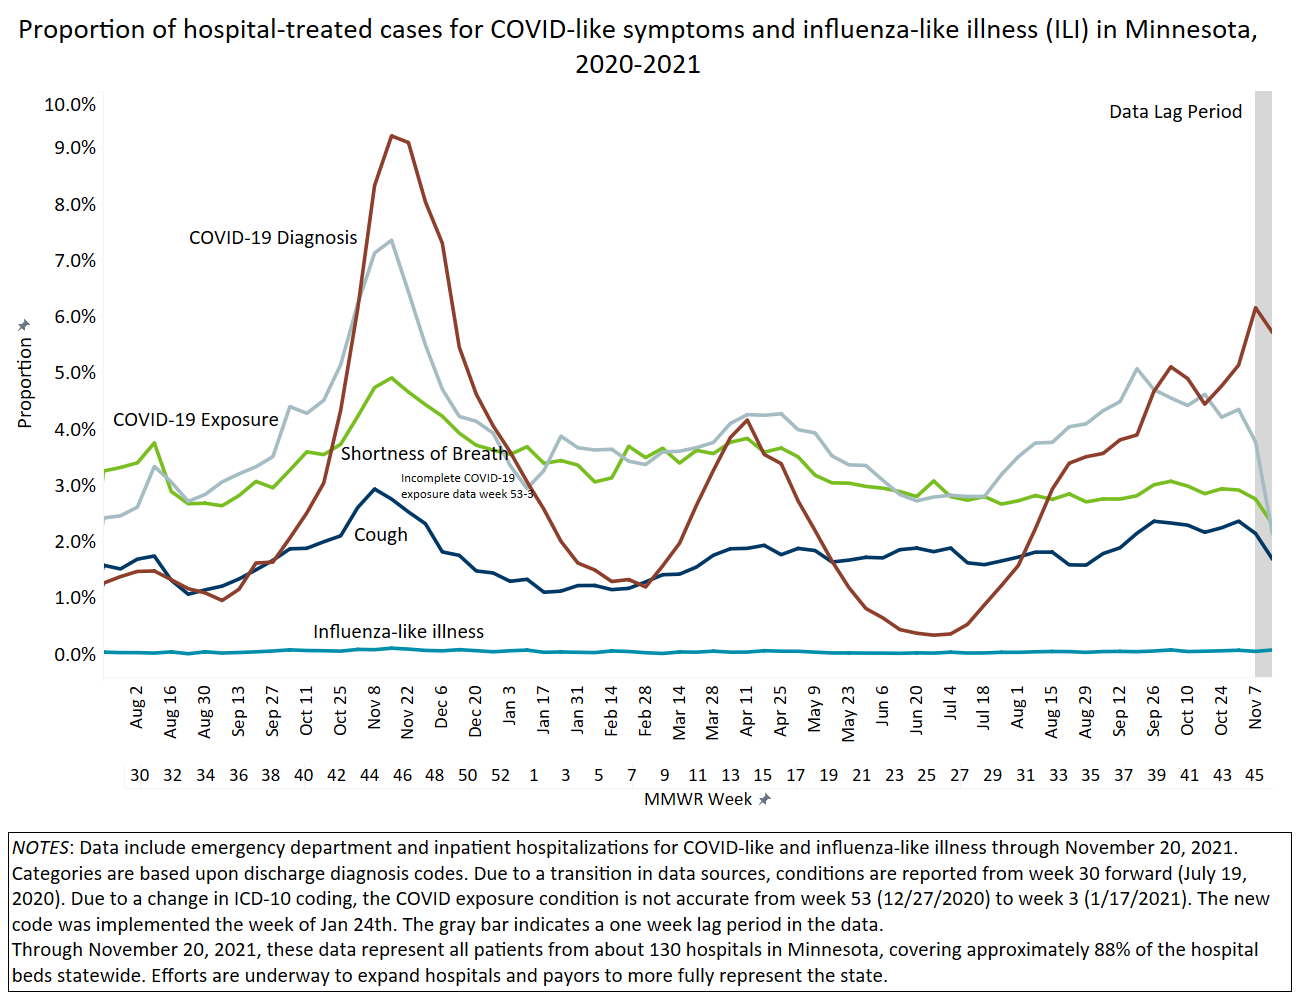 Graph showing proportion of hospital-treated cases for COVID-like symptoms and influenza-like illness in Minnesota; explained in text